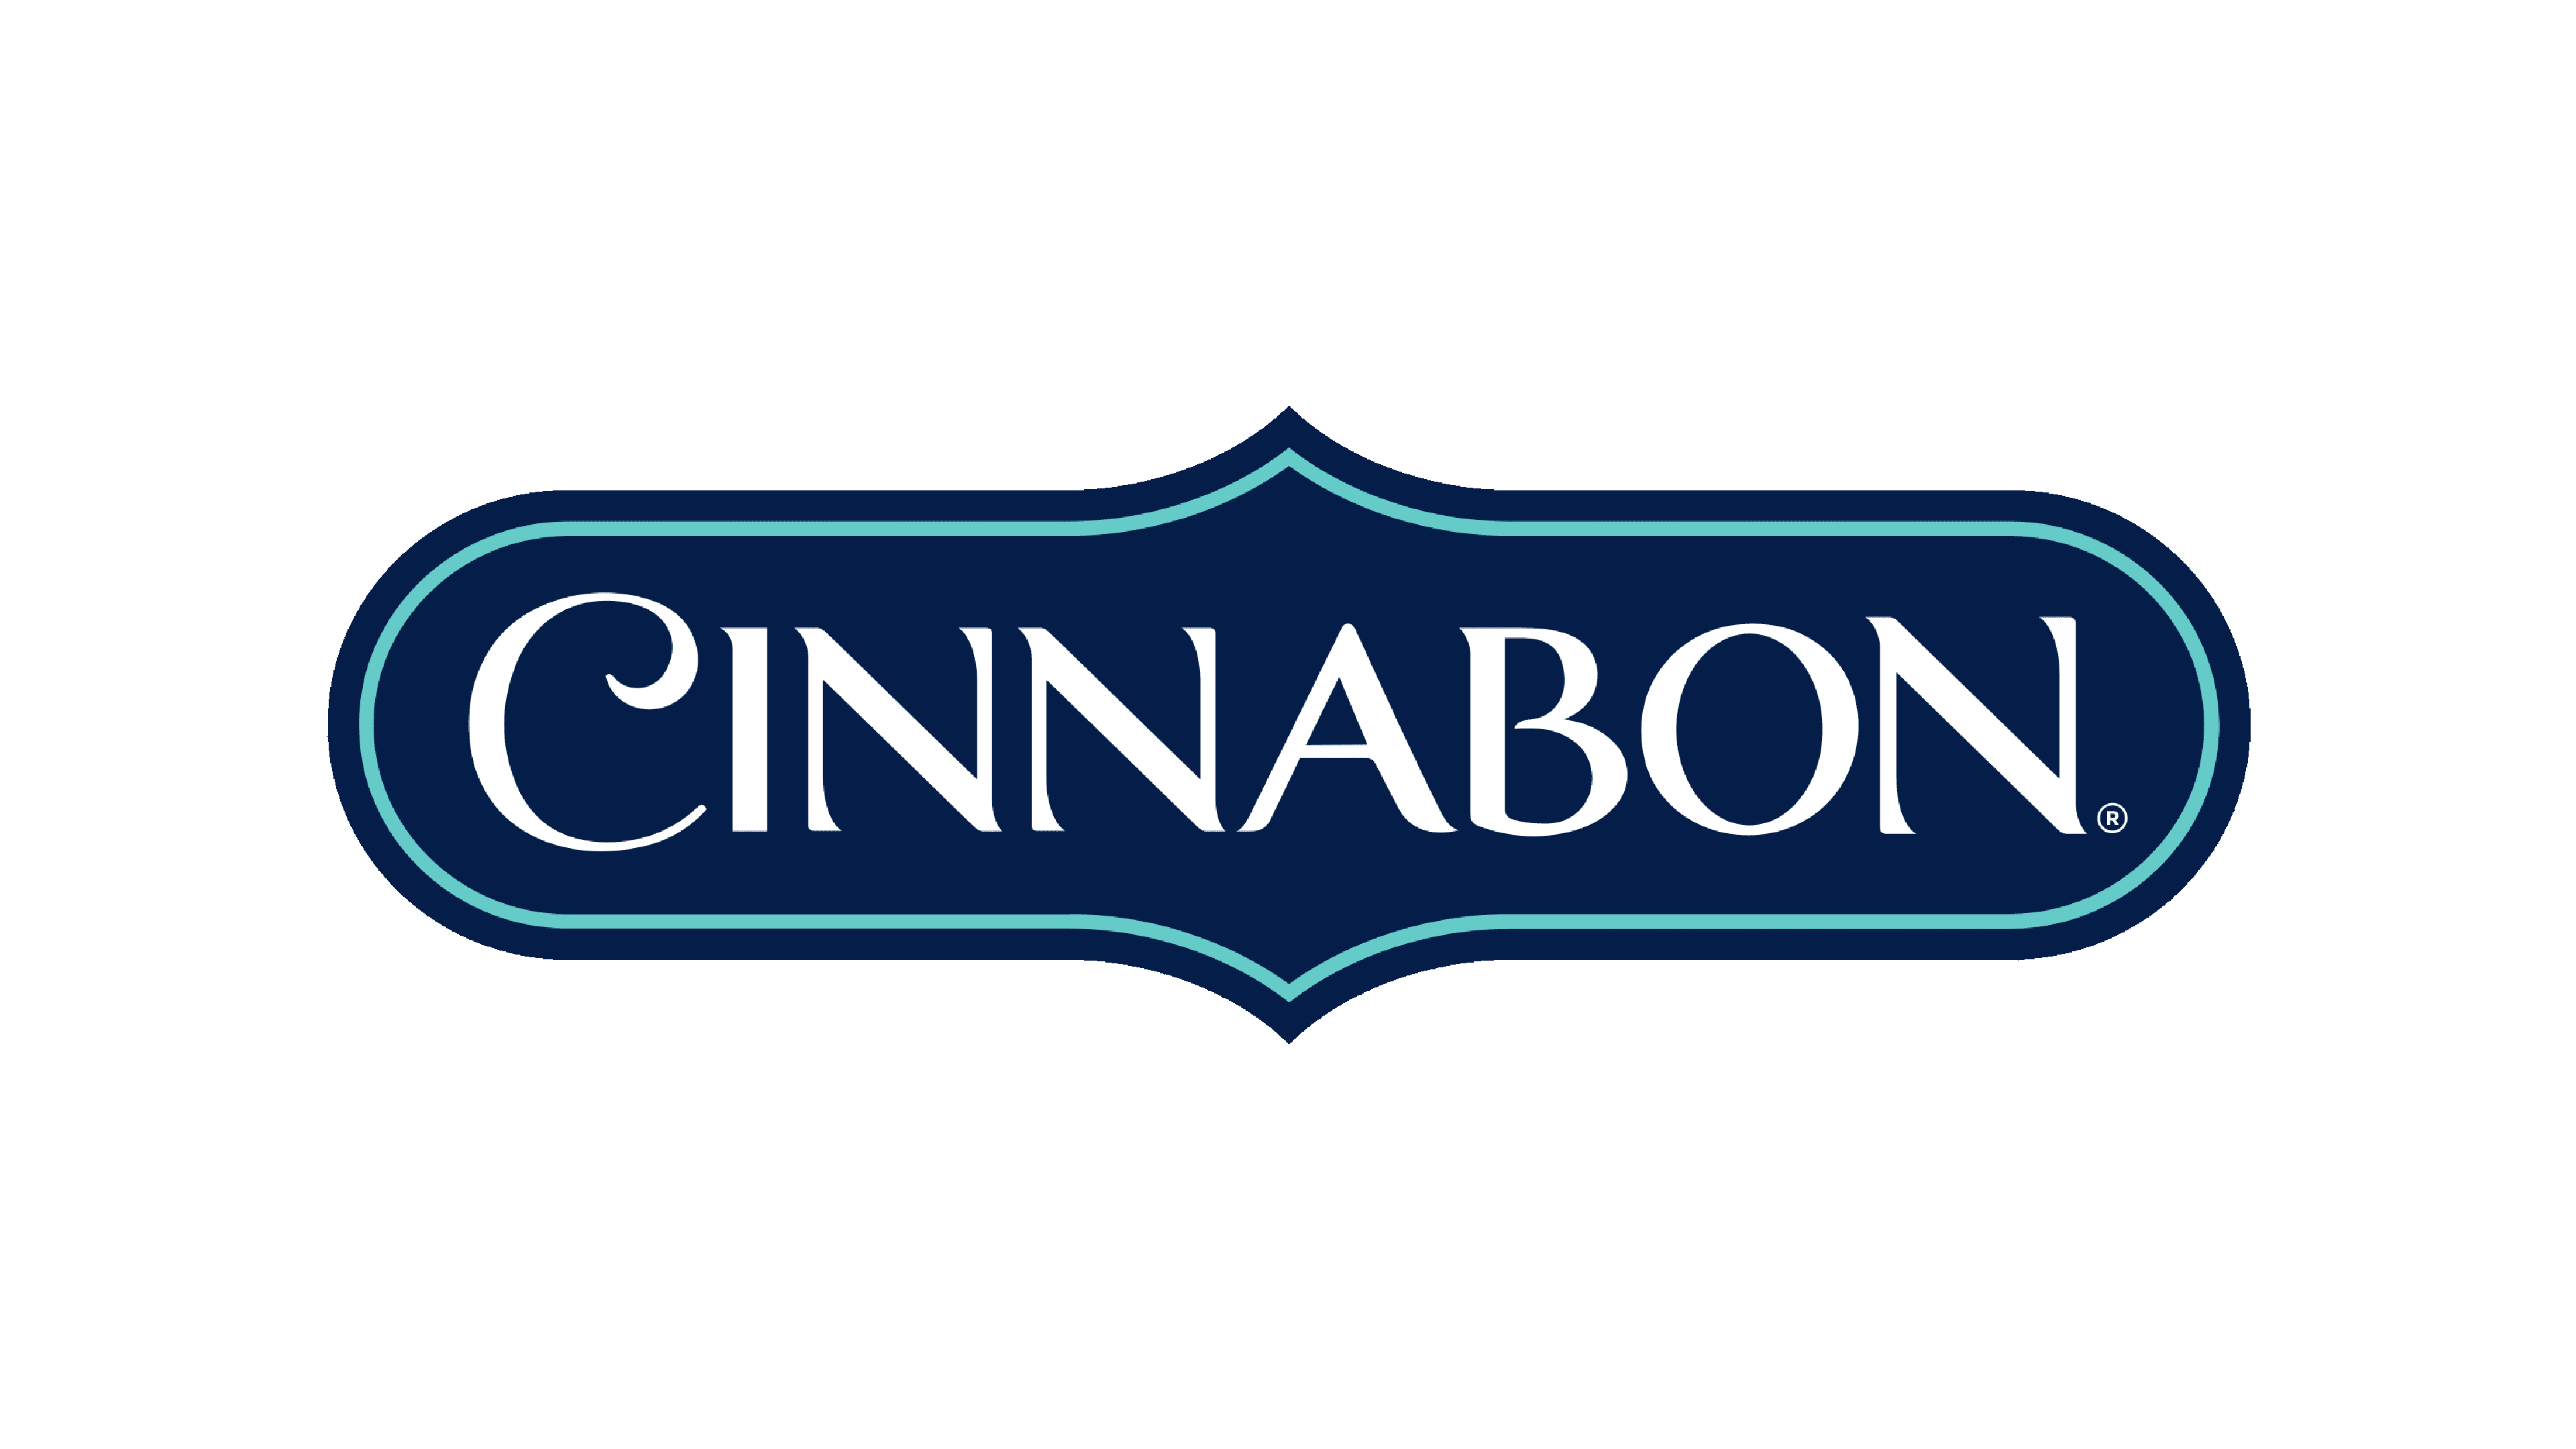 The Cinnabon logo, a dark blue banner with a lighter blue border. The word "Cinnabon" is written in the center of the banner in white.